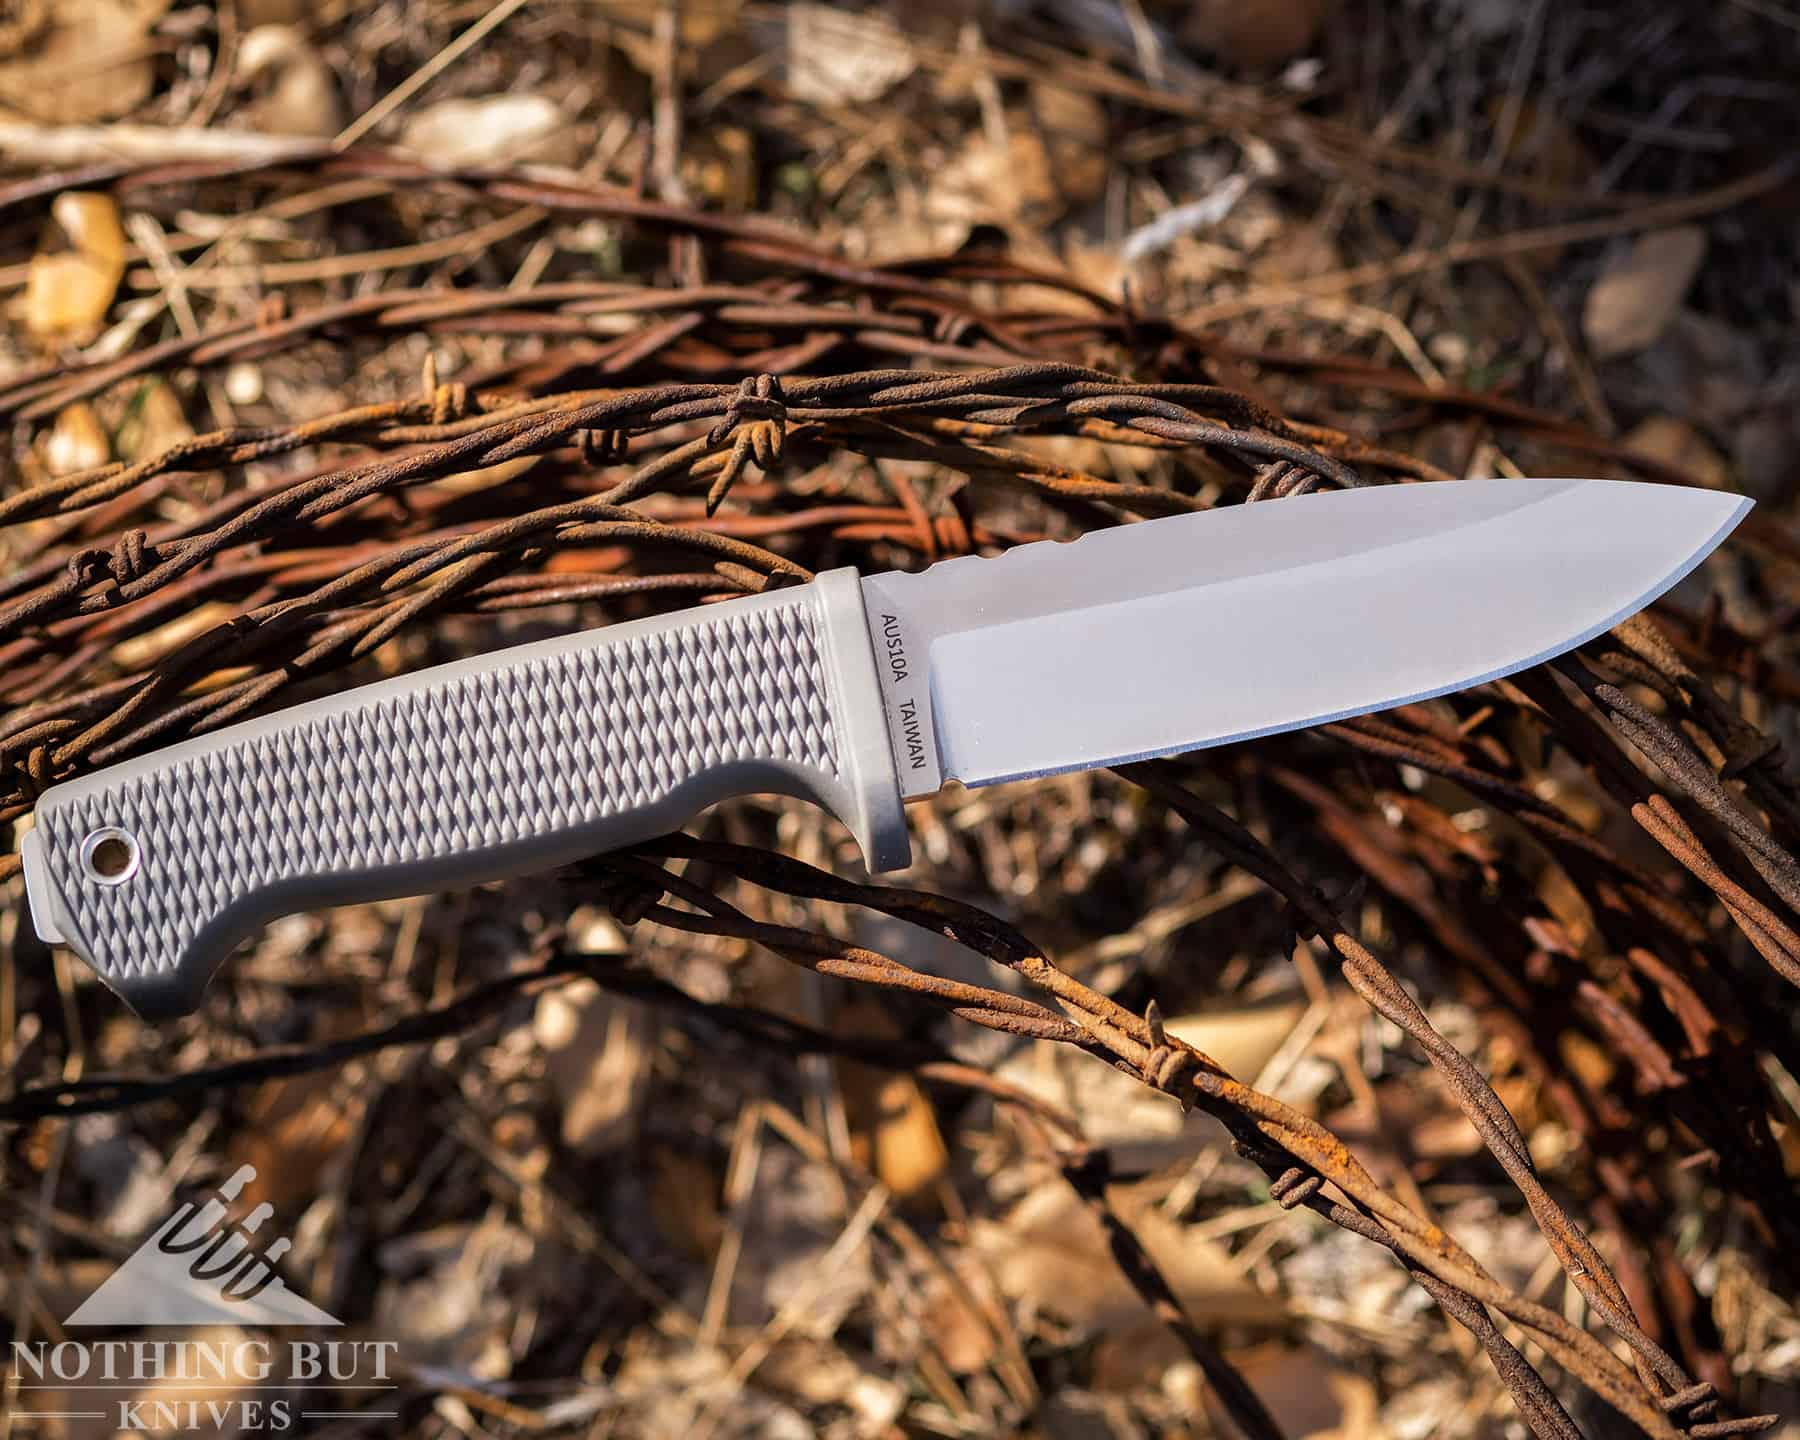 The FreeReign's blade has an incredably sharp edge right out of the box. 